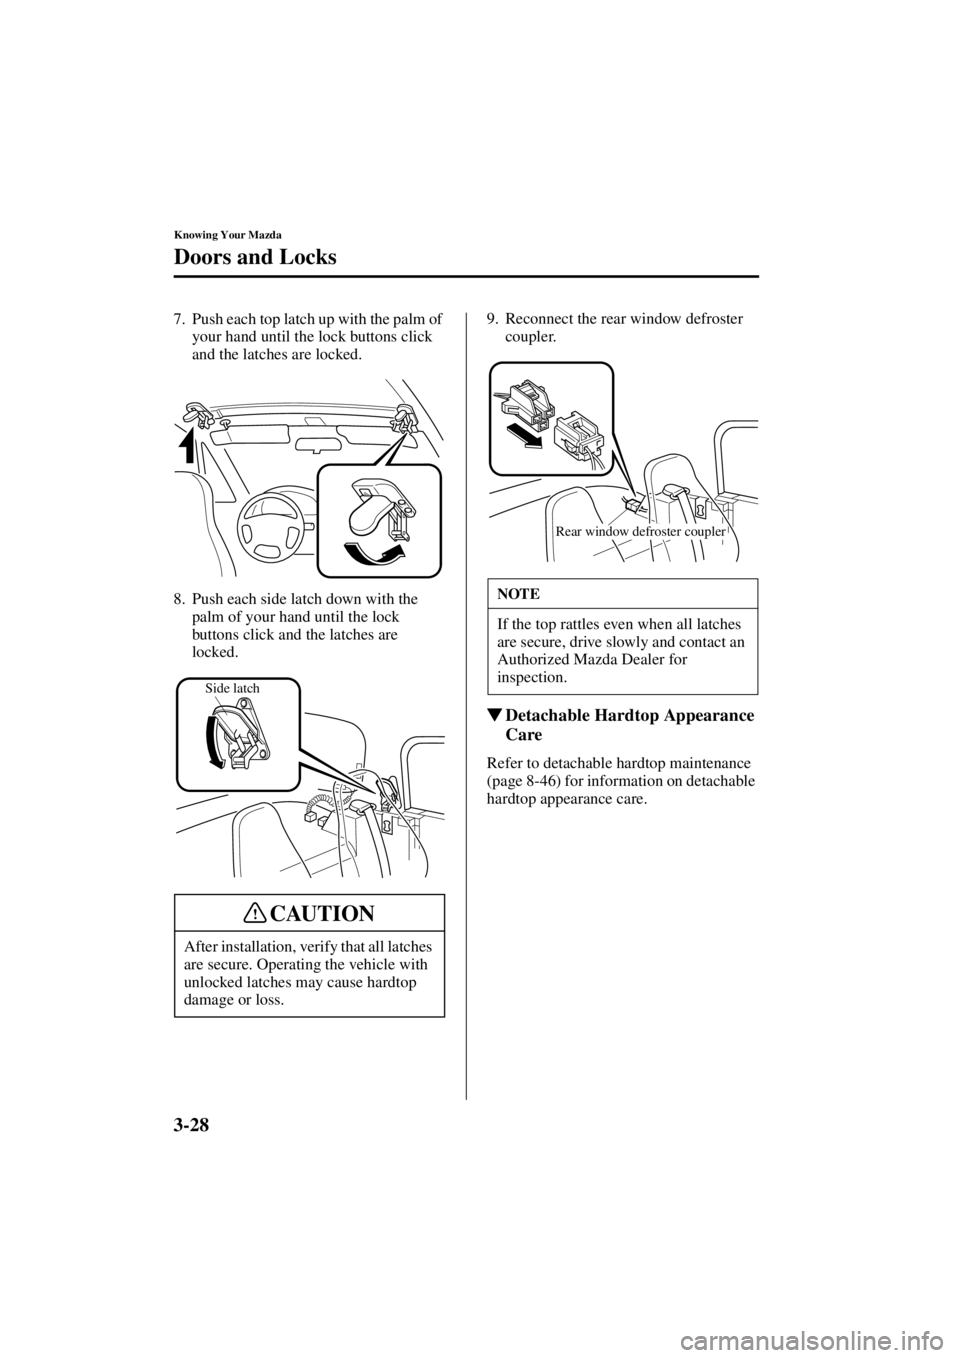 MAZDA MODEL SPEED MX-5 MIATA 2004 Repair Manual 3-28
Knowing Your Mazda
Doors and Locks
Form No. 8T02-EA-03L
7. Push each top latch up with the palm of your hand until the lock buttons click 
and the latches are locked.
8. Push each side latch down